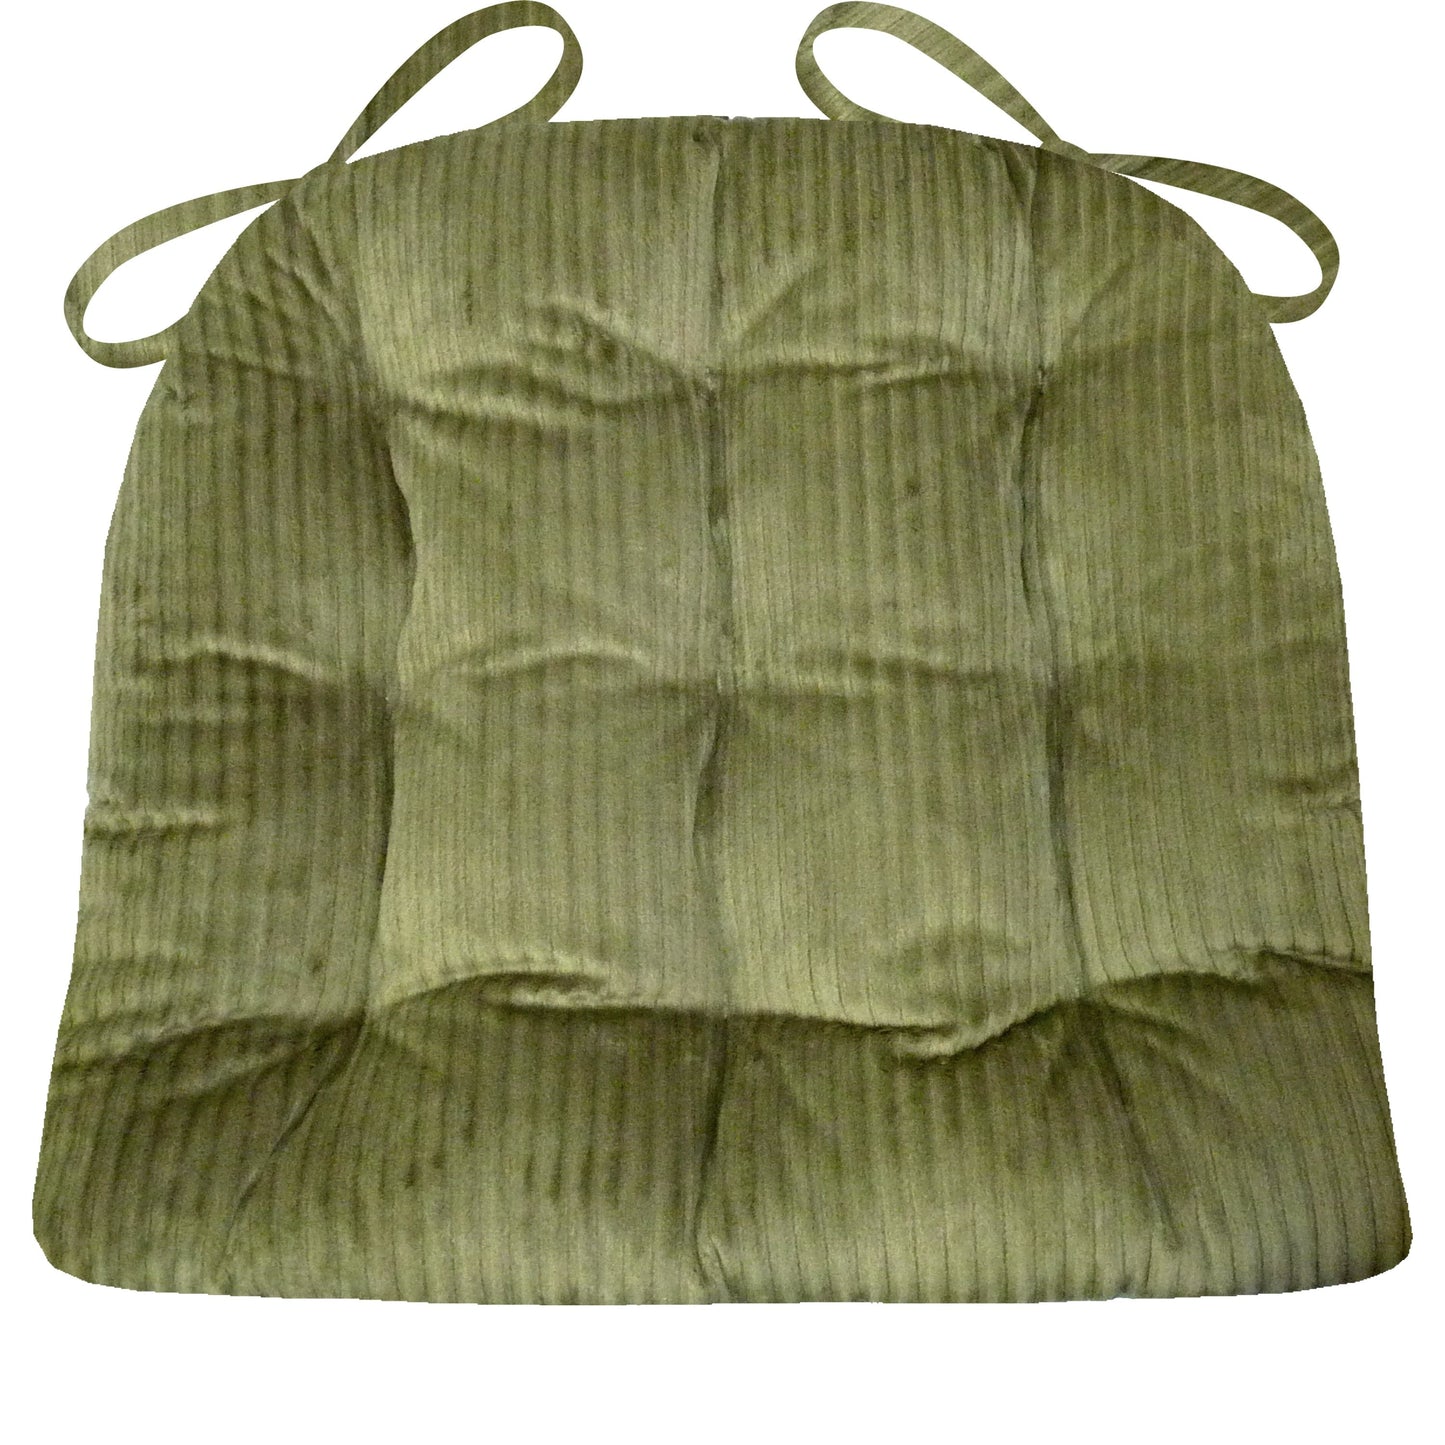 Corduroy (Wide Wale) Olive Green Dining Chair Pad  - Latex Foam Fill - Reversible